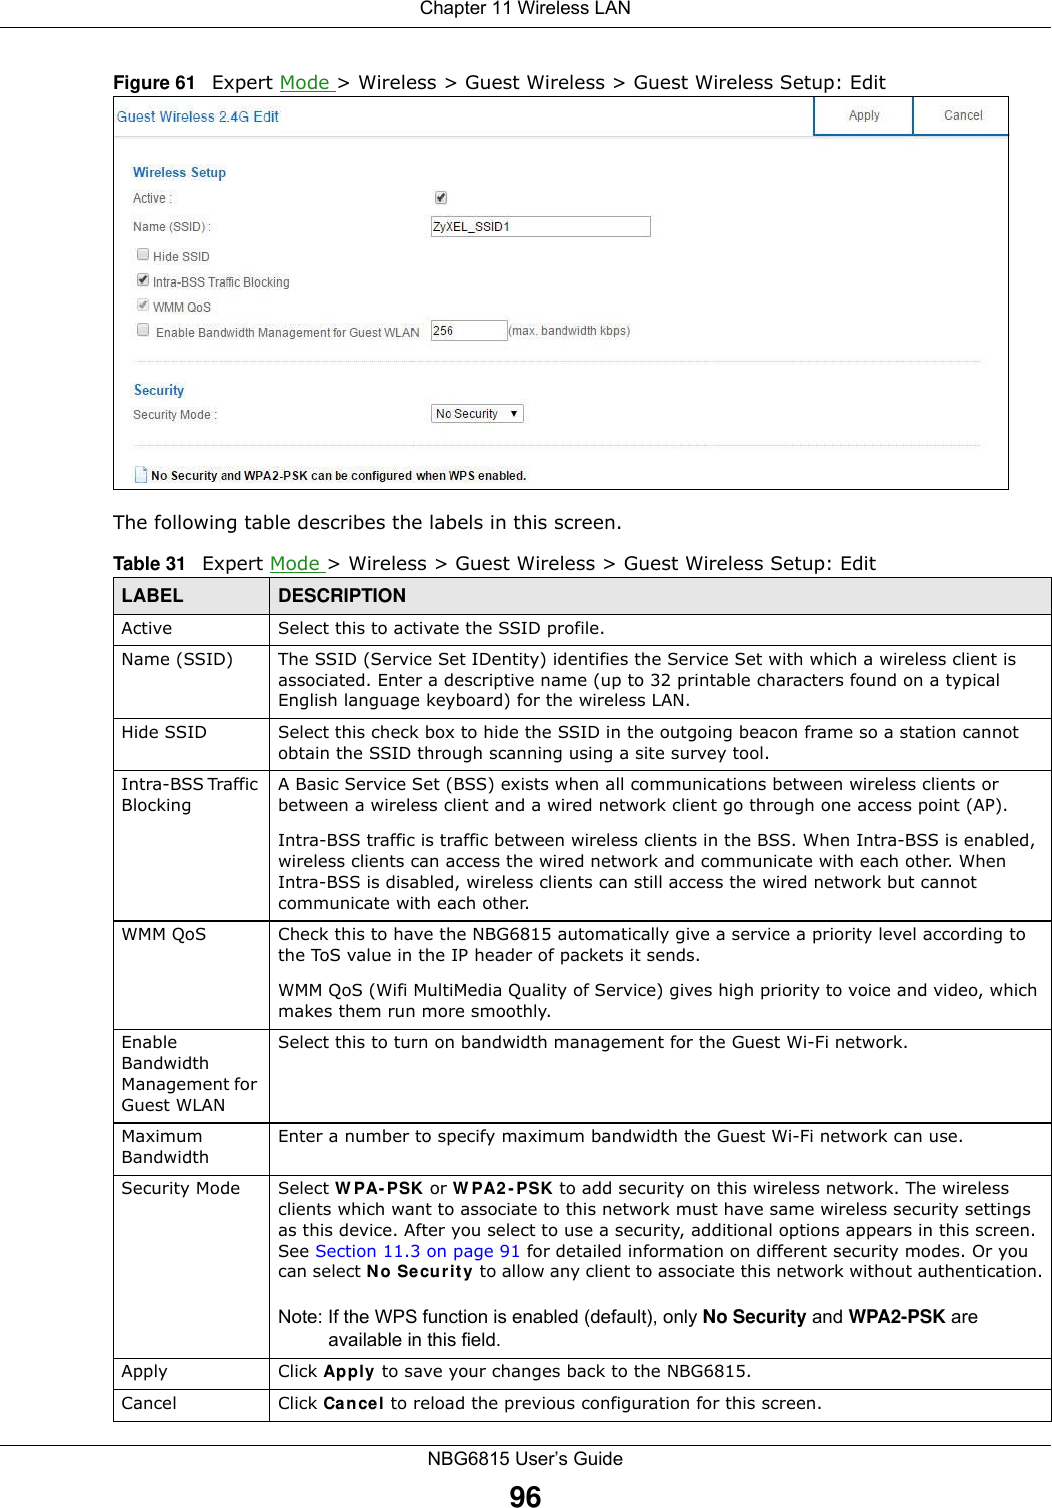 Chapter 11 Wireless LANNBG6815 User’s Guide96Figure 61   Expert Mode &gt; Wireless &gt; Guest Wireless &gt; Guest Wireless Setup: Edit The following table describes the labels in this screen.Table 31   Expert Mode &gt; Wireless &gt; Guest Wireless &gt; Guest Wireless Setup: EditLABEL DESCRIPTIONActive Select this to activate the SSID profile.Name (SSID)  The SSID (Service Set IDentity) identifies the Service Set with which a wireless client is associated. Enter a descriptive name (up to 32 printable characters found on a typical English language keyboard) for the wireless LAN. Hide SSID Select this check box to hide the SSID in the outgoing beacon frame so a station cannot obtain the SSID through scanning using a site survey tool.Intra-BSS Traffic BlockingA Basic Service Set (BSS) exists when all communications between wireless clients or between a wireless client and a wired network client go through one access point (AP). Intra-BSS traffic is traffic between wireless clients in the BSS. When Intra-BSS is enabled, wireless clients can access the wired network and communicate with each other. When Intra-BSS is disabled, wireless clients can still access the wired network but cannot communicate with each other.WMM QoS Check this to have the NBG6815 automatically give a service a priority level according to the ToS value in the IP header of packets it sends. WMM QoS (Wifi MultiMedia Quality of Service) gives high priority to voice and video, which makes them run more smoothly.Enable Bandwidth Management for Guest WLAN Select this to turn on bandwidth management for the Guest Wi-Fi network.Maximum Bandwidth Enter a number to specify maximum bandwidth the Guest Wi-Fi network can use.Security Mode Select WPA-PSK or WPA2-PSK to add security on this wireless network. The wireless clients which want to associate to this network must have same wireless security settings as this device. After you select to use a security, additional options appears in this screen. See Section 11.3 on page 91 for detailed information on different security modes. Or you can select No Security to allow any client to associate this network without authentication.Note: If the WPS function is enabled (default), only No Security and WPA2-PSK are available in this field.Apply Click Apply to save your changes back to the NBG6815.Cancel Click Cancel to reload the previous configuration for this screen.